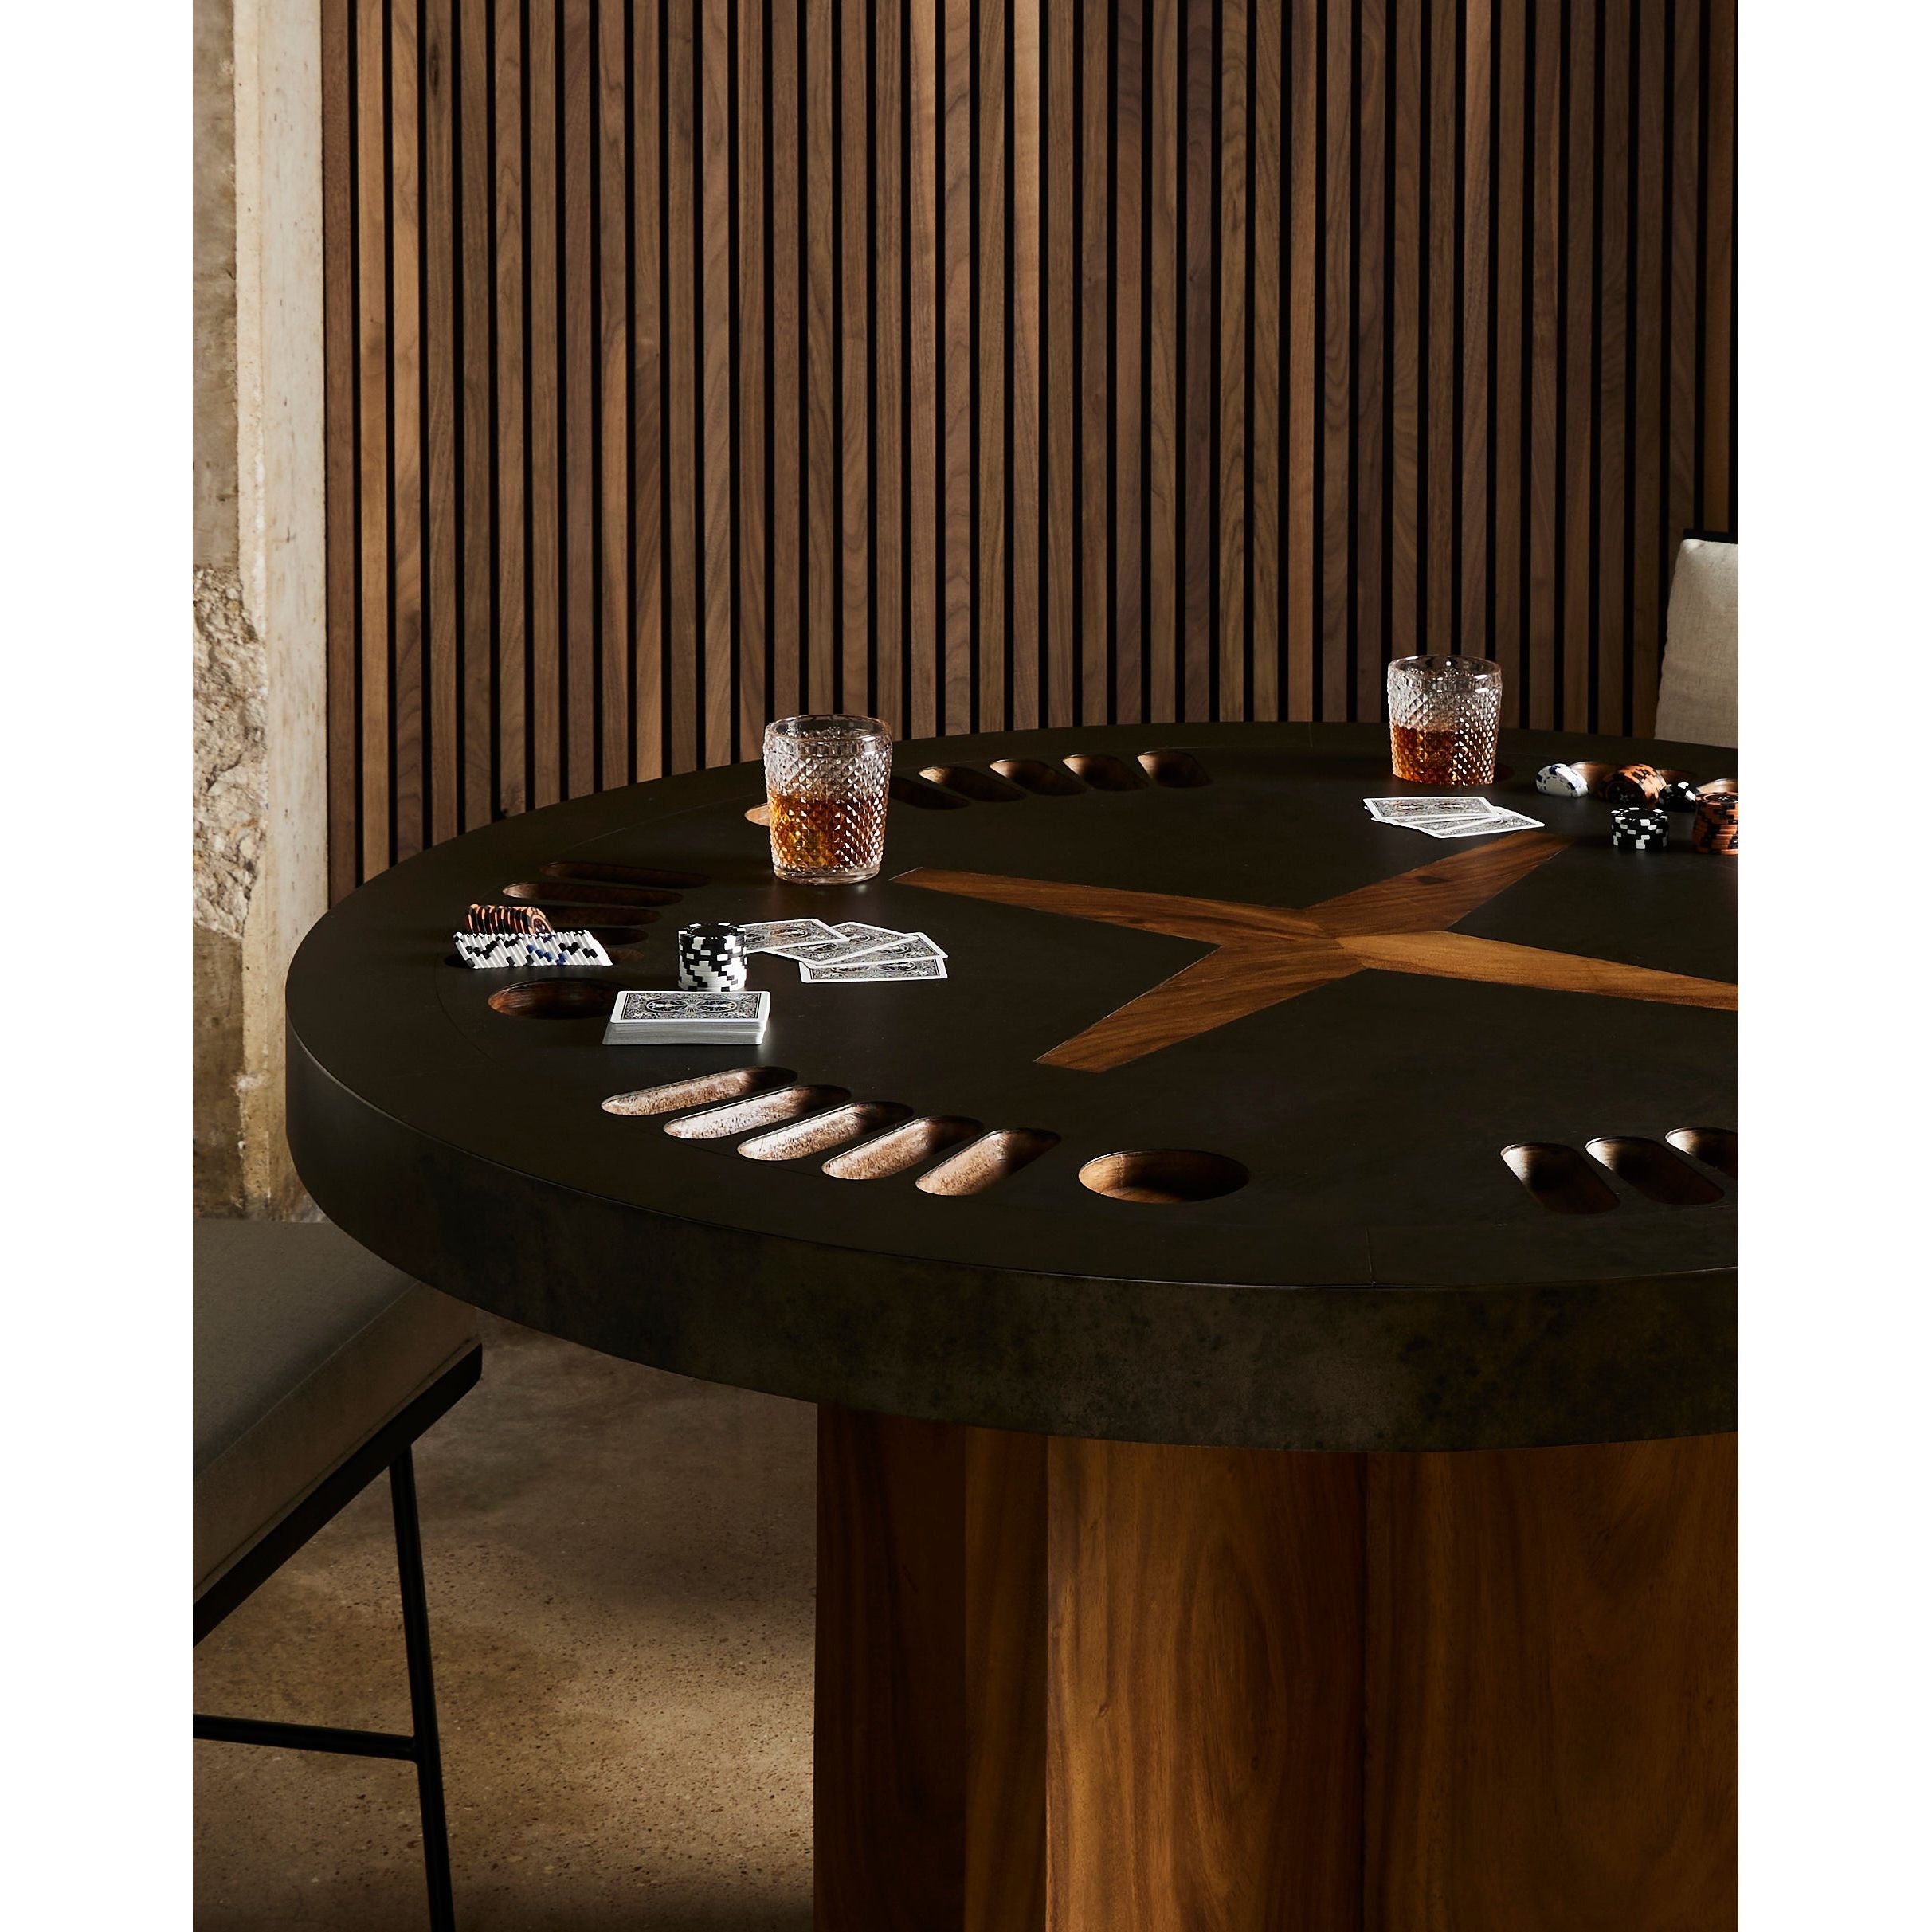 Handmade by skilled artisans, the Natural Brown Guanacaste Poker Table is a one-of-a-kind game that features a beautiful blend of hand-finished Guanacaste wood and metal that’s been aged through a manual, month-long process using natural elements to bring unique character to each piece. Includes built-ins for poker chips and drinks. Amethyst Home provides interior design services, furniture, rugs, and lighting in the Monterey metro area. 